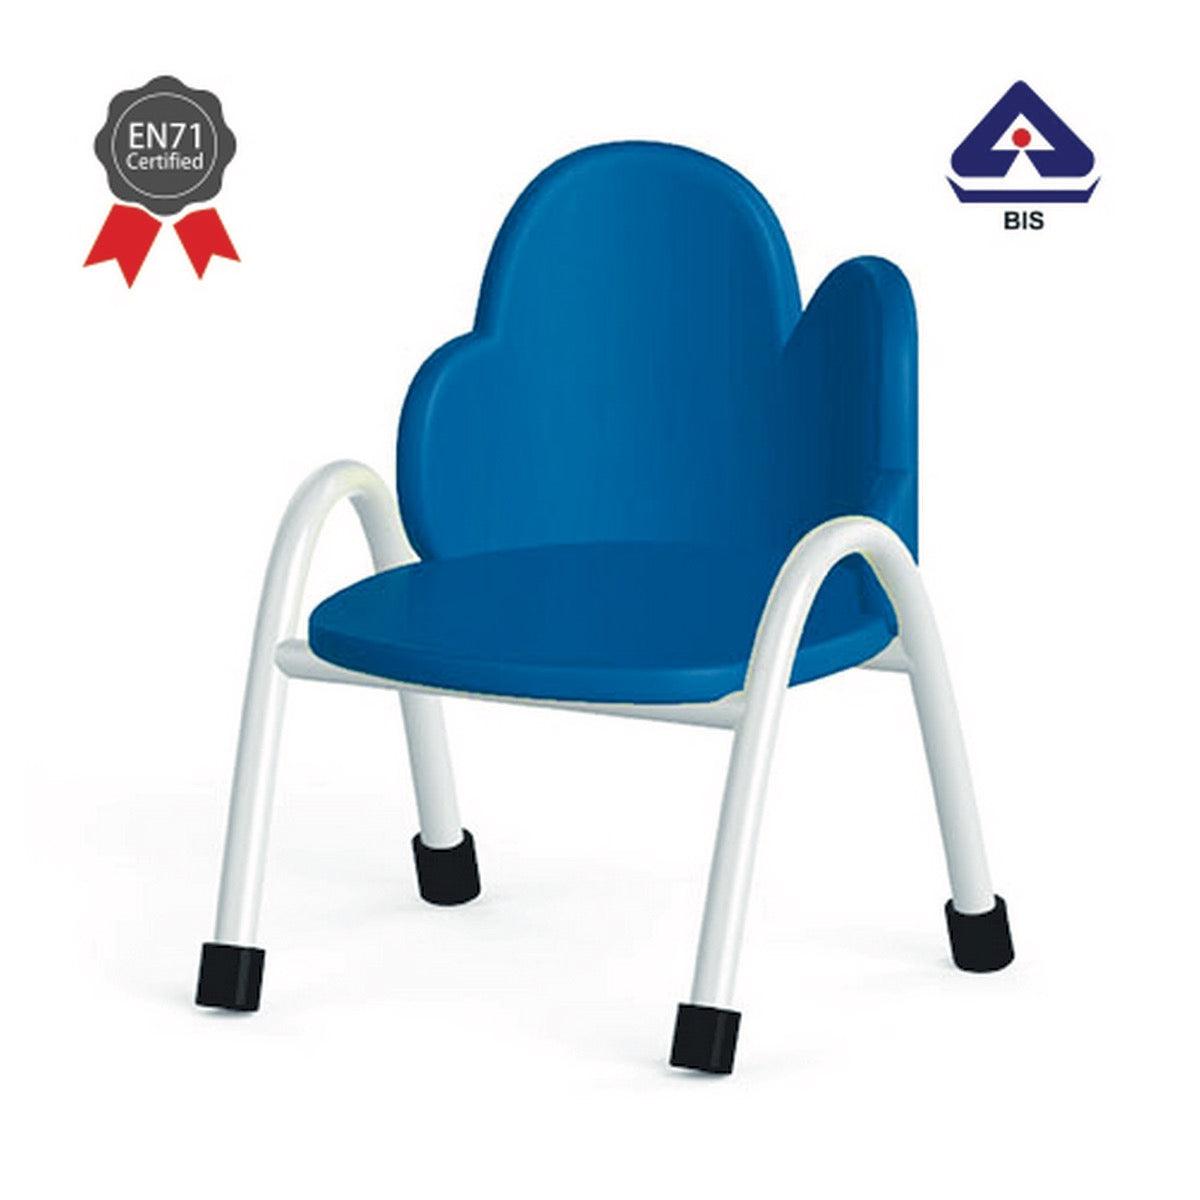 Ok Play Cloud Chair, Study Chair, Sturdy And Durable Chair, Plastic Chair, Perfect For Home, Creches And School, Blue, 2 to 4 Years, Height 8 Inches